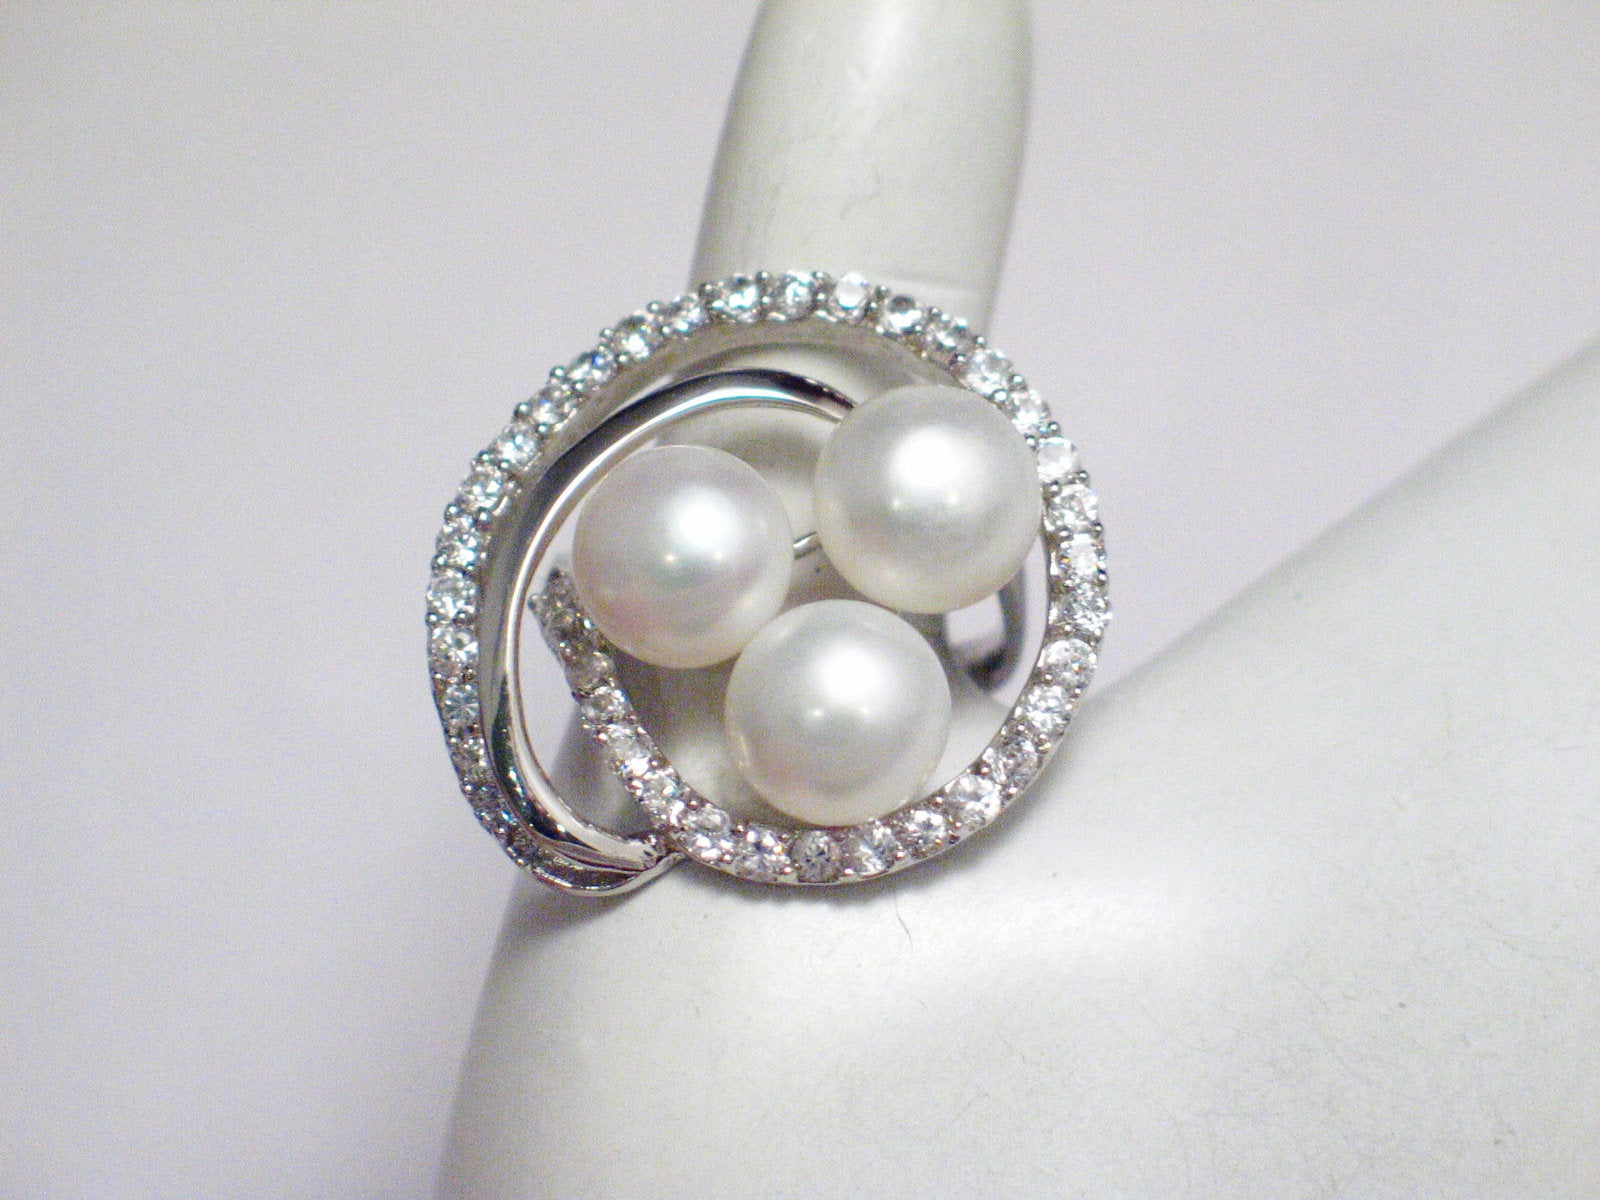 Ring | Womens Big Sterling Silver Glittery Cz & White Pearl Spiral Cocktail Ring  8.75 | Blingschlingers Jewelry